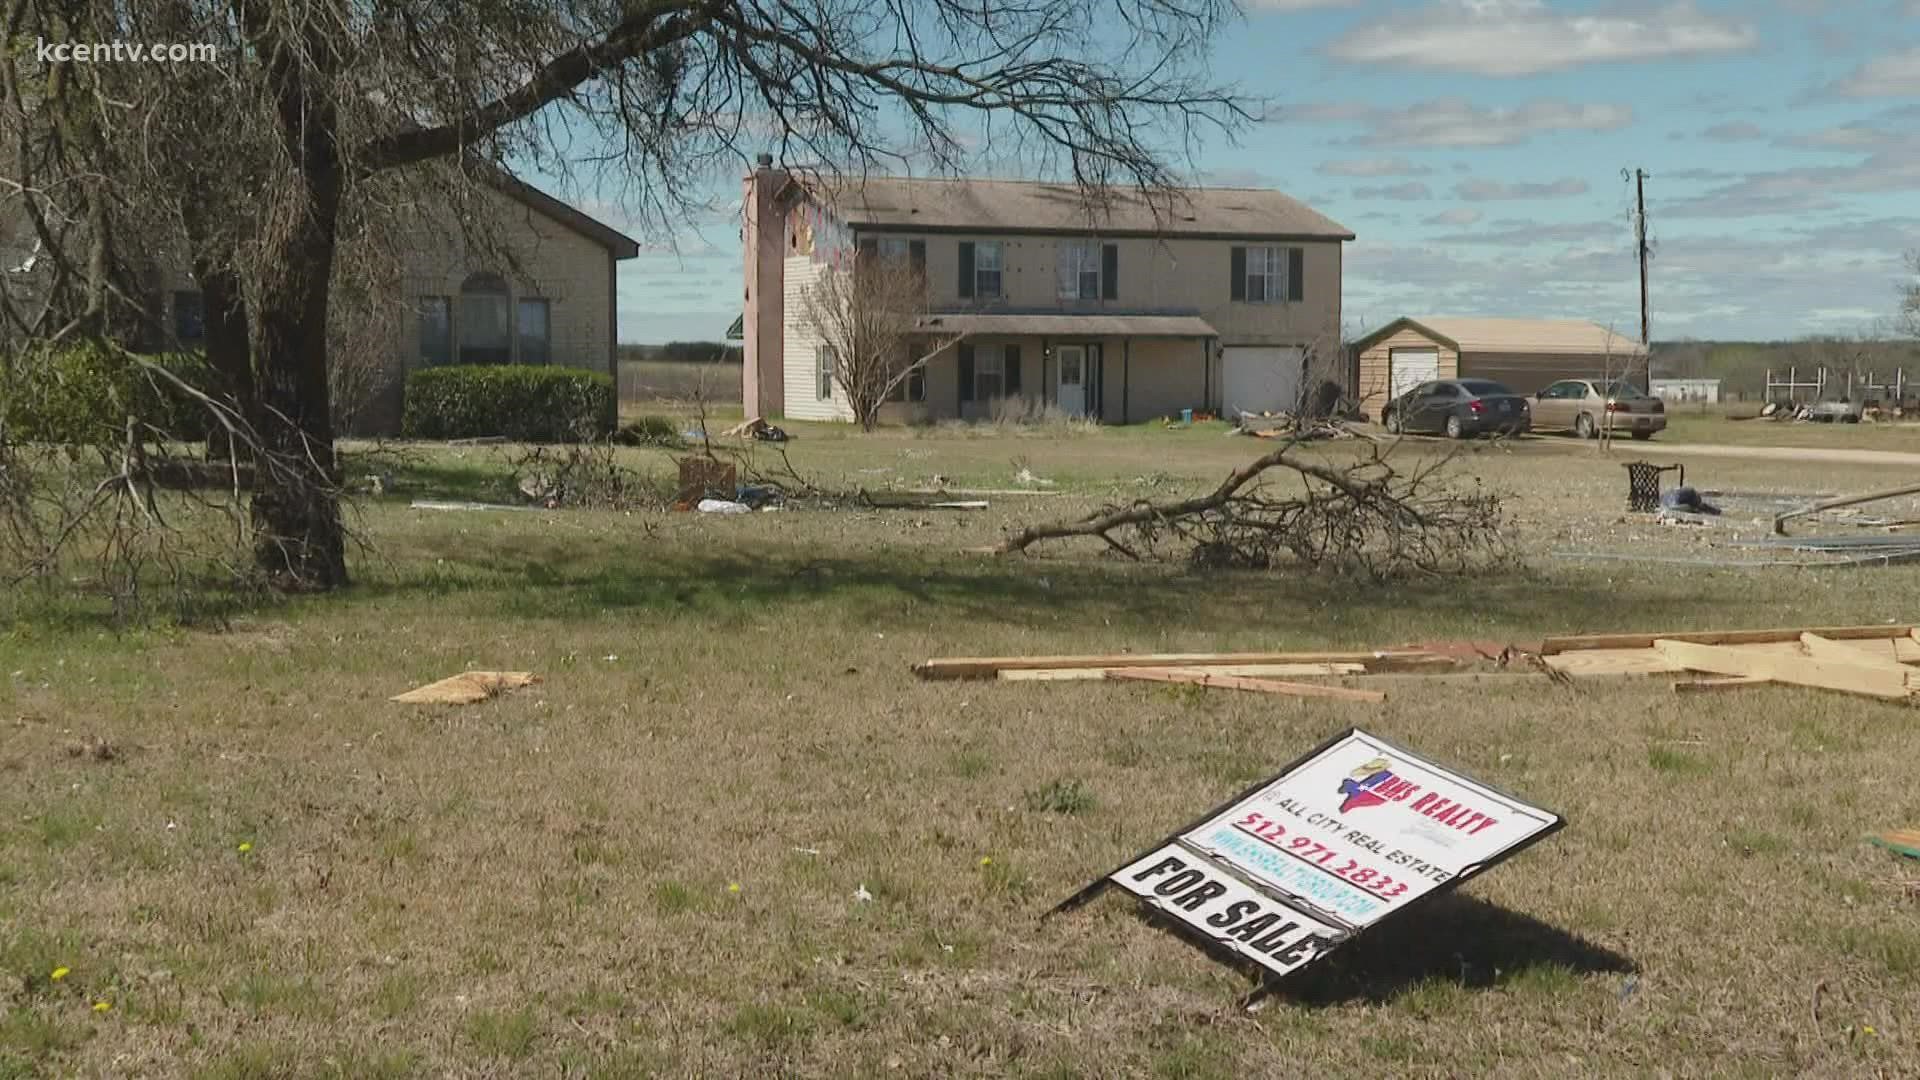 After the storm on Monday, the Jarrell community is trying to pick up the pieces.